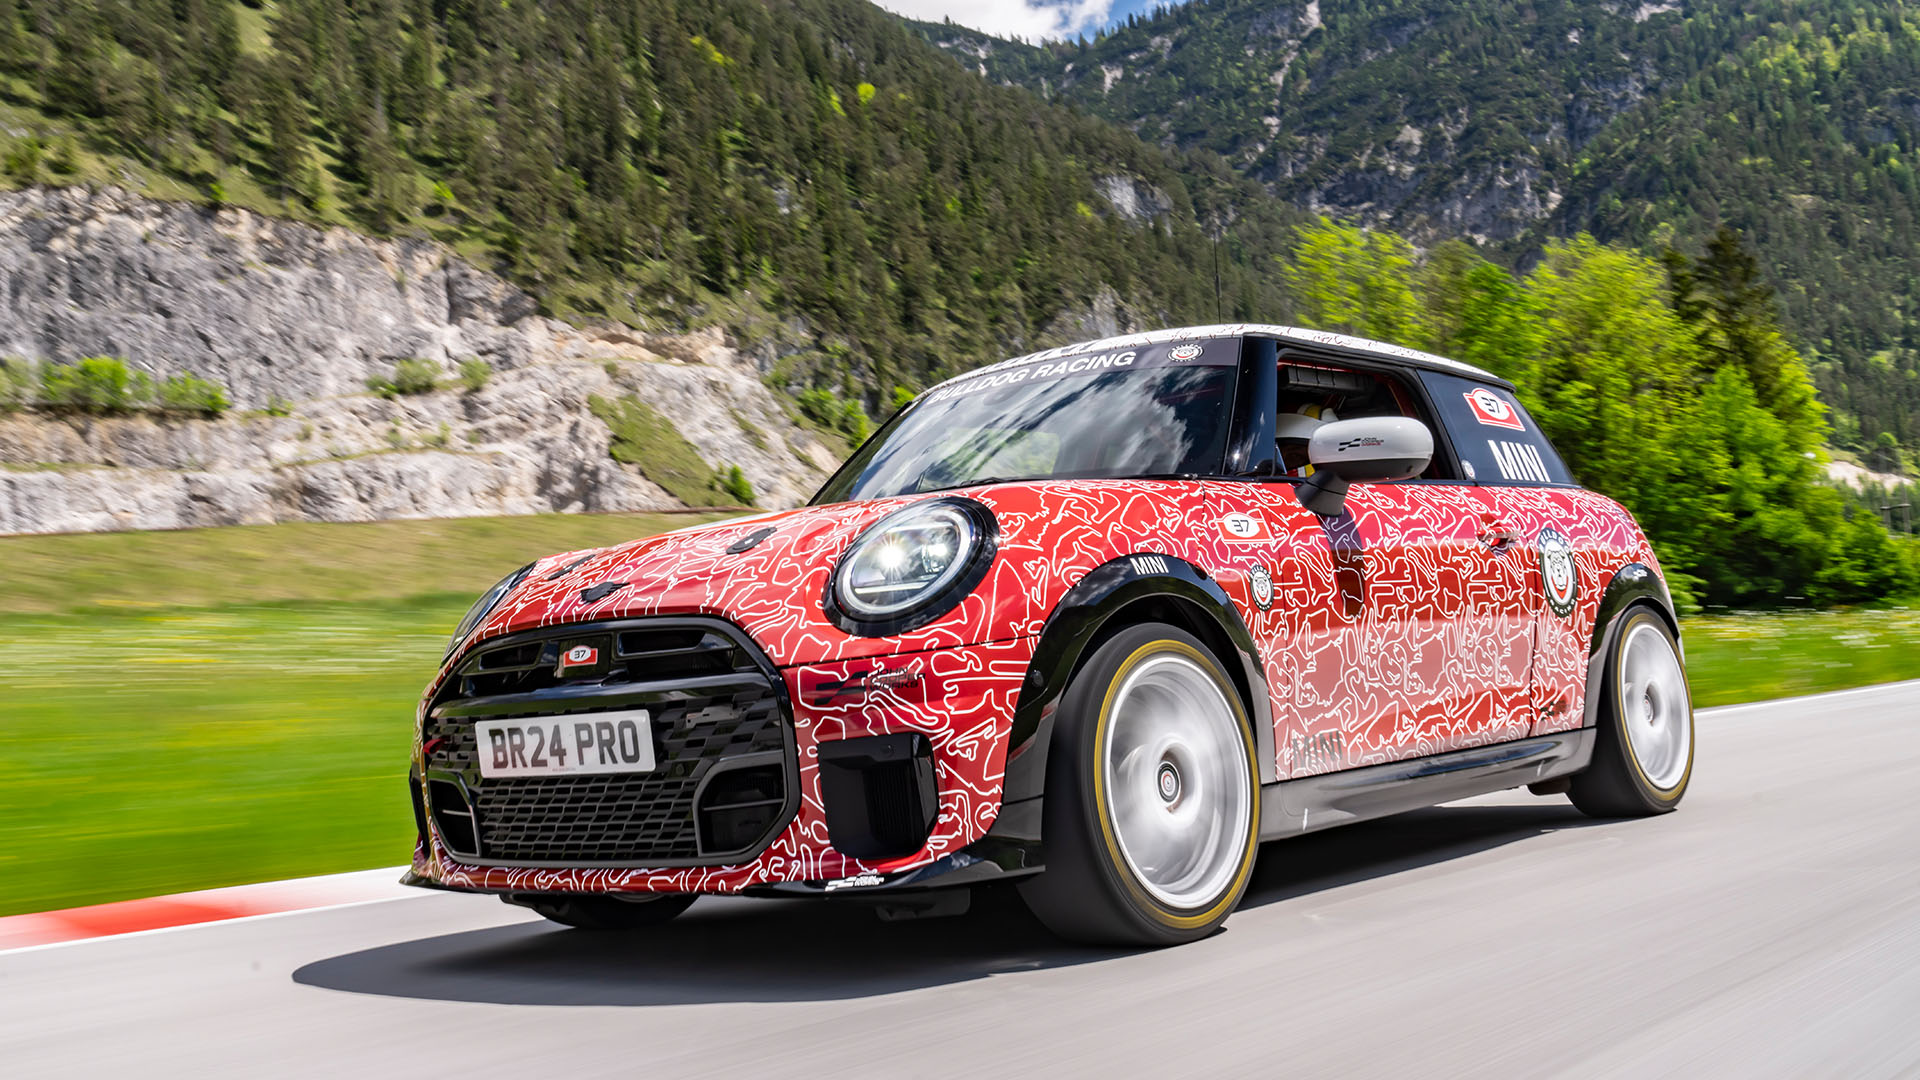 New MINI John Cooper Works to Debut at 24 Hours of Nürburgring Ahead of its World Premiere